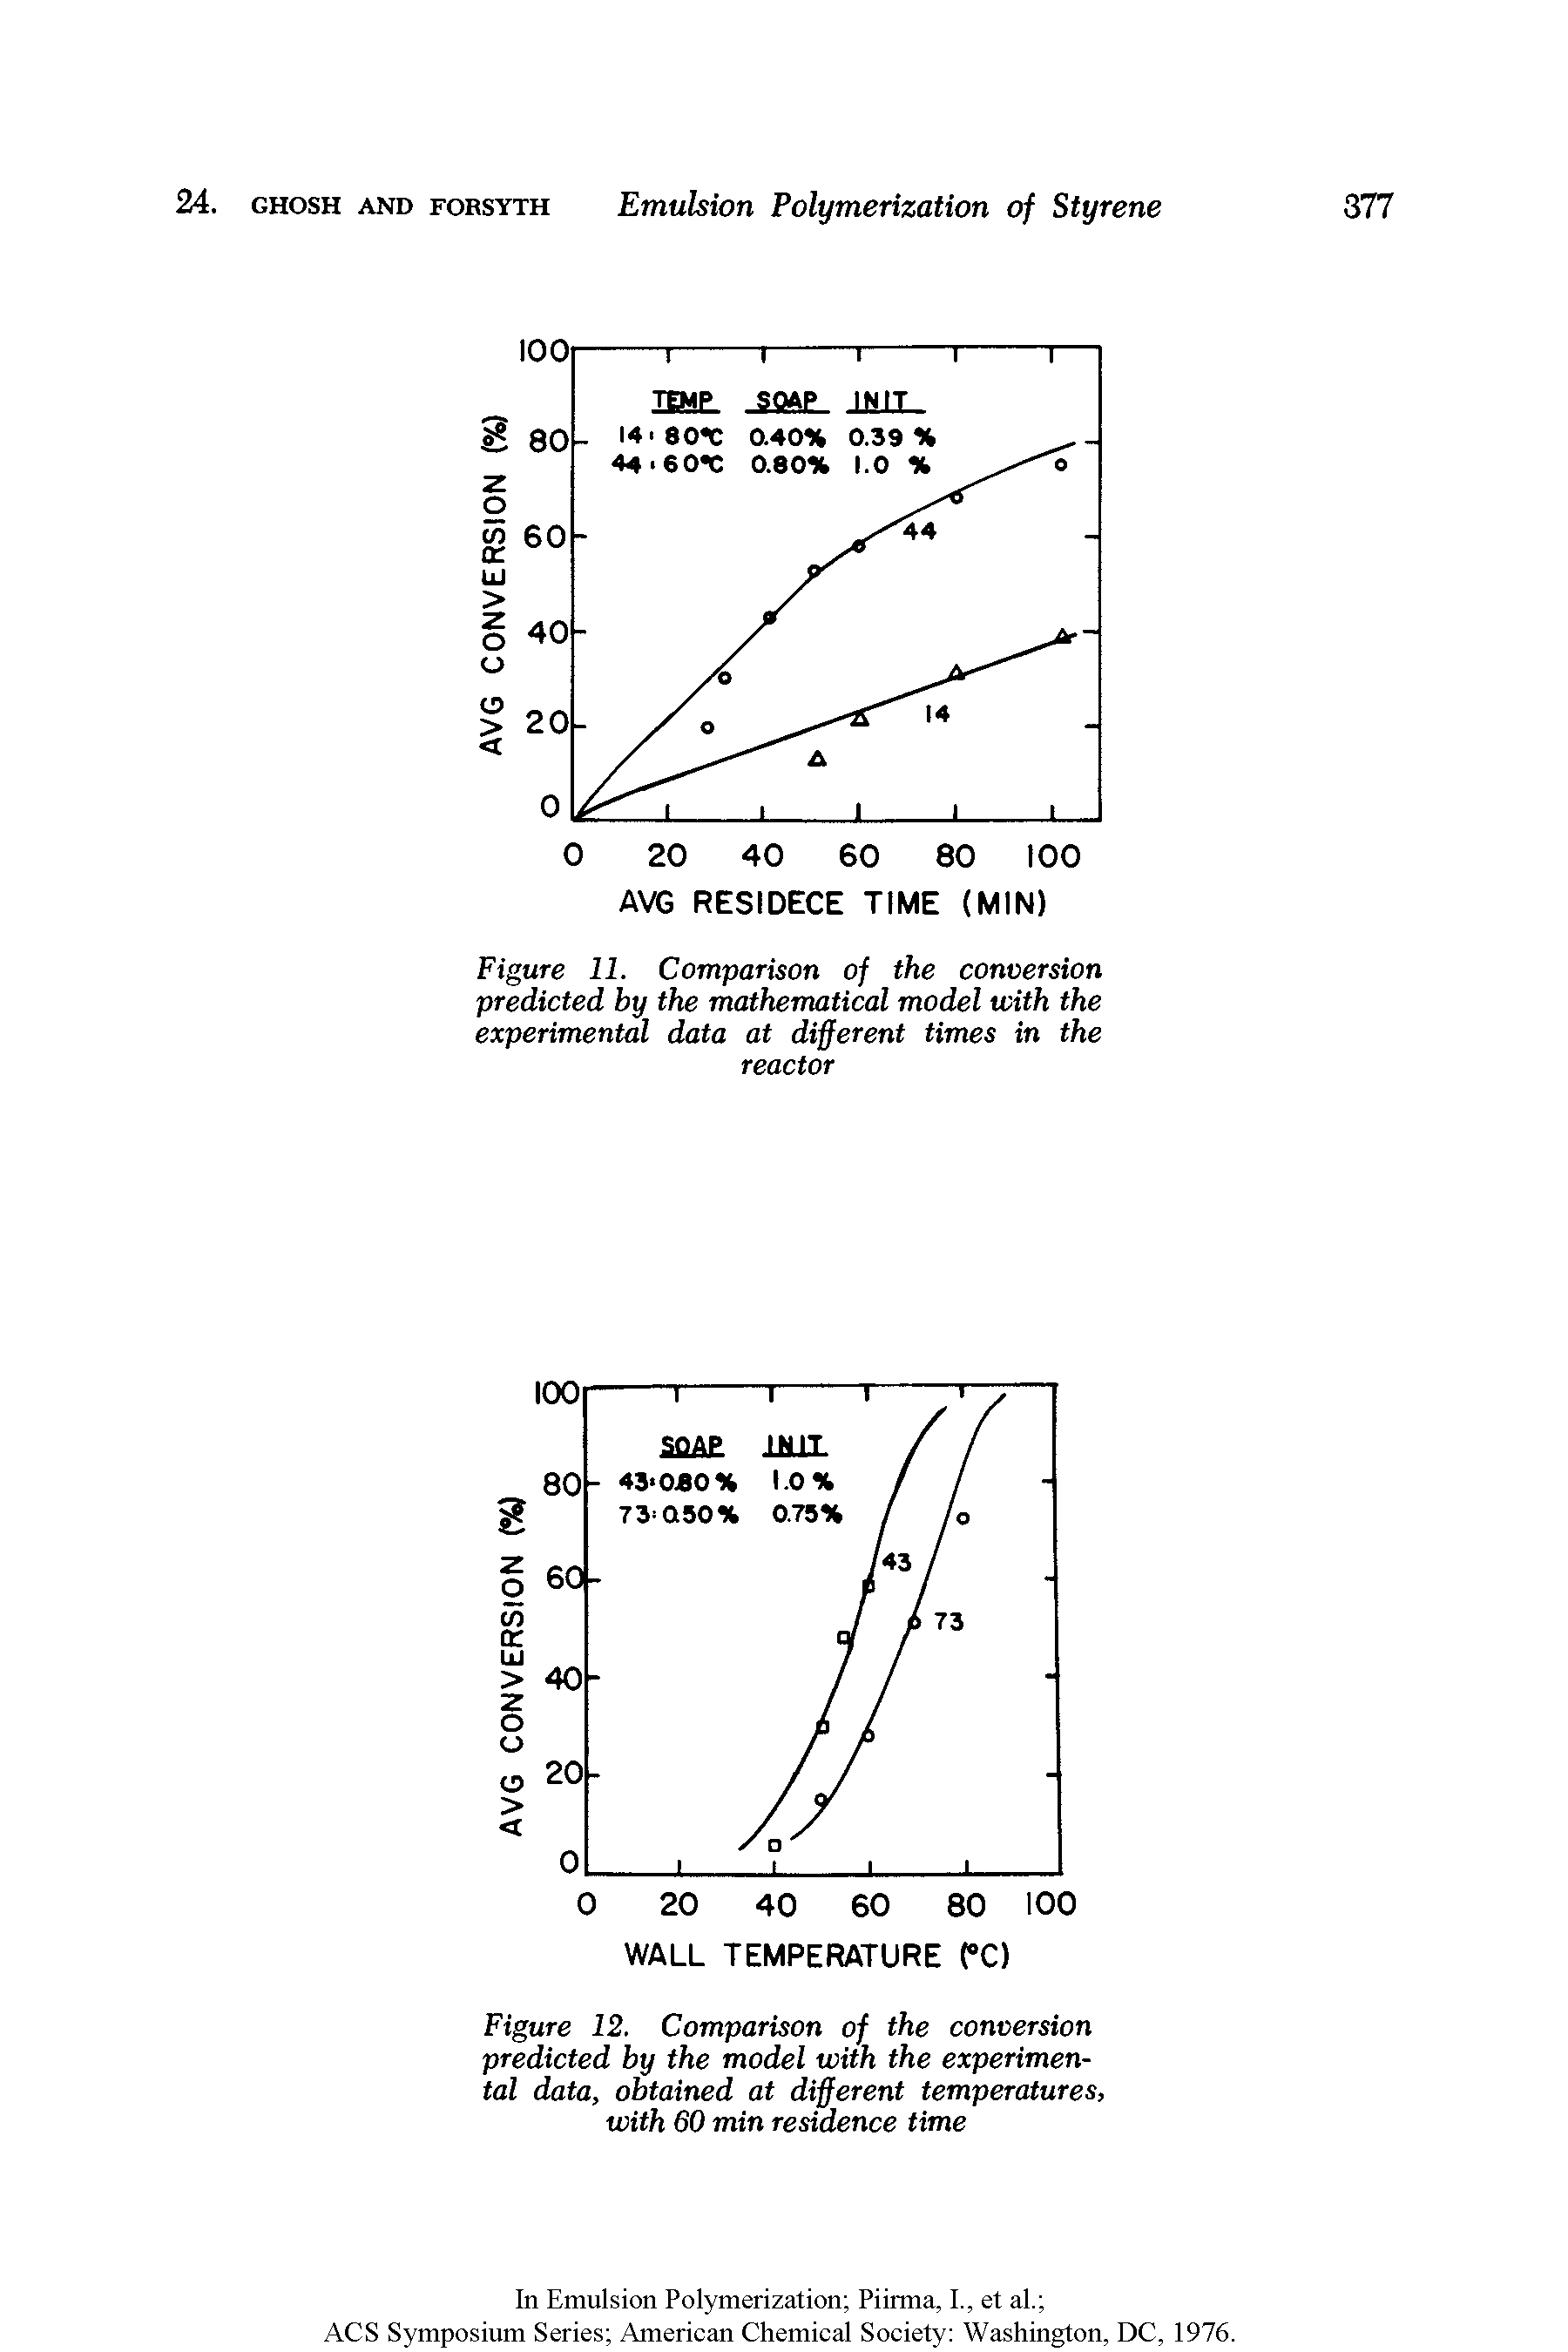 Figure 11. Comparison of the conversion predicted by the mathematical model with the experimental data at different times in the reactor...